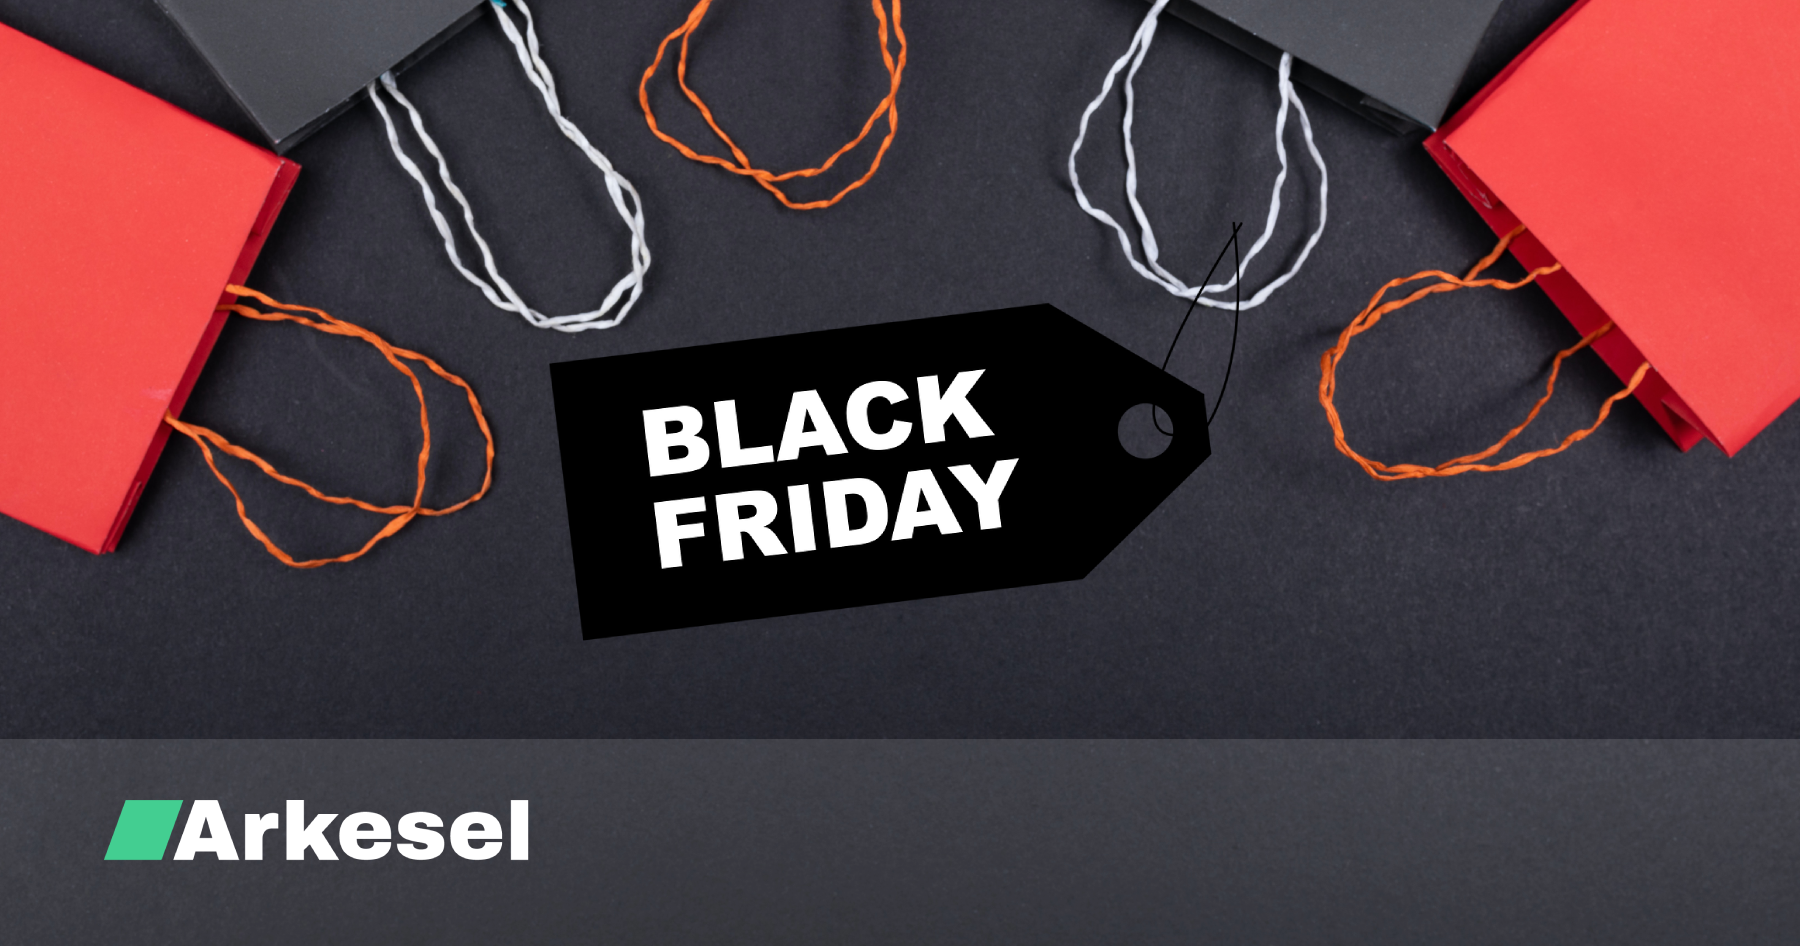 Creating a Black Friday Campaign: Make more sales!